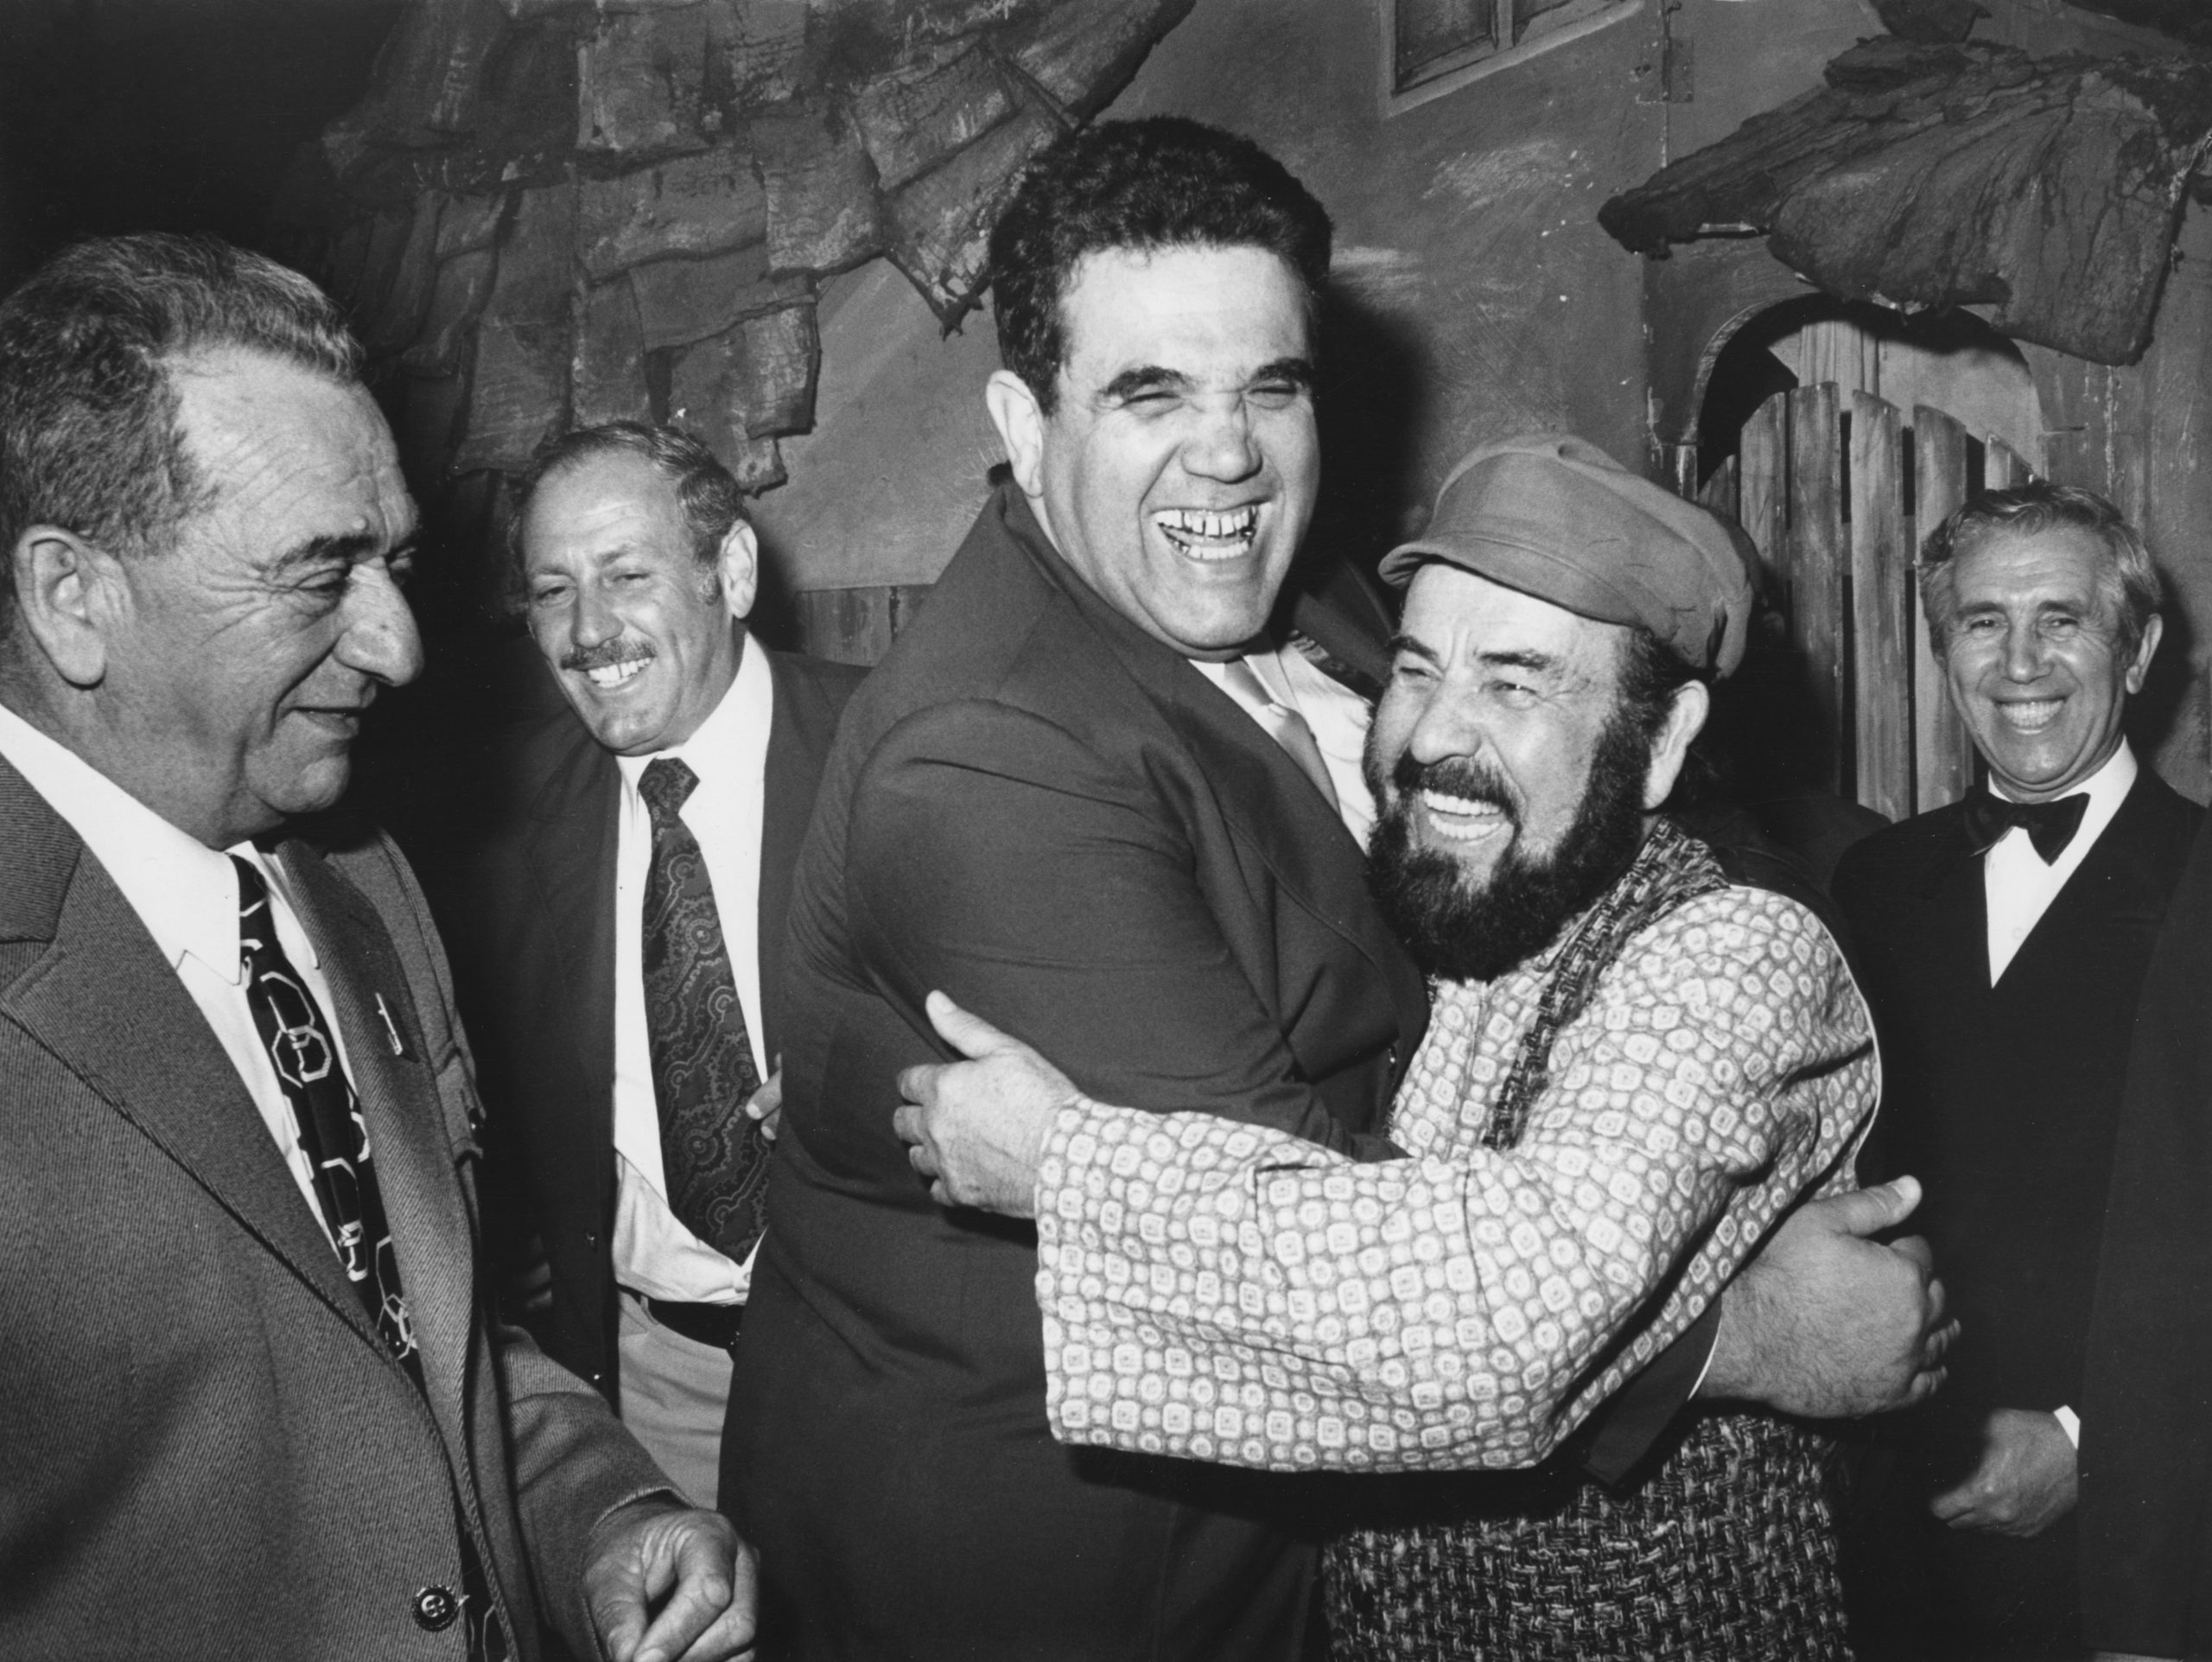 Yossef Gutfreund and Shmuel Rodensky hug each other and laugh. Around them stand three men, smiling broadly. All of them are wearing suits, Rodensky a patterned wide shirt and a cap. Backdrops can be seen in the background.